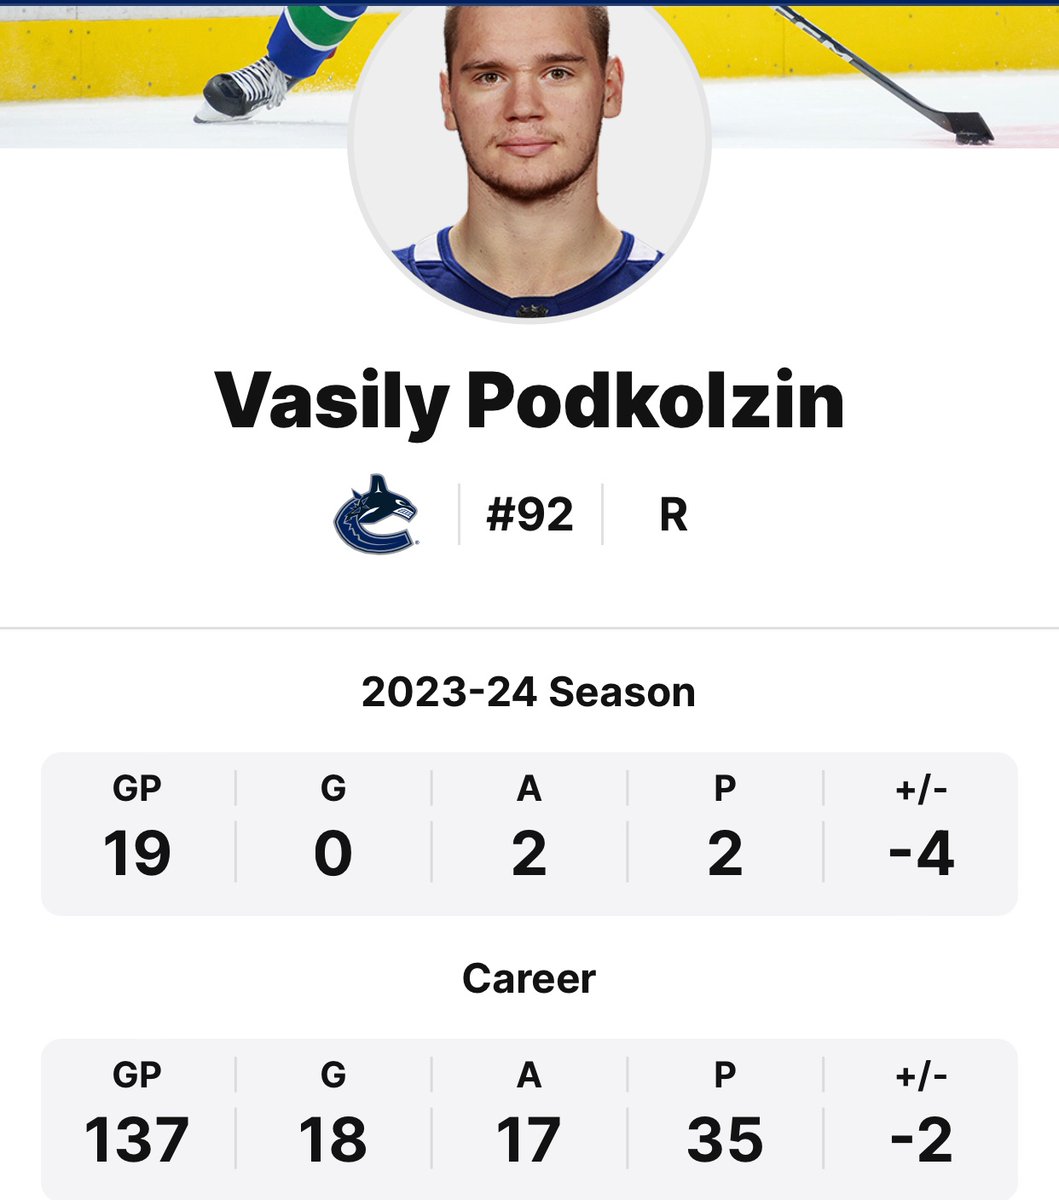 He’ll be 23 very soon. It’s still too early to write him off. But his AHL stats are mediocre and his NHL stats are abysmal. Is he destined to be a career minor-leaguer or NHL 4th-liner at best? #Canucks